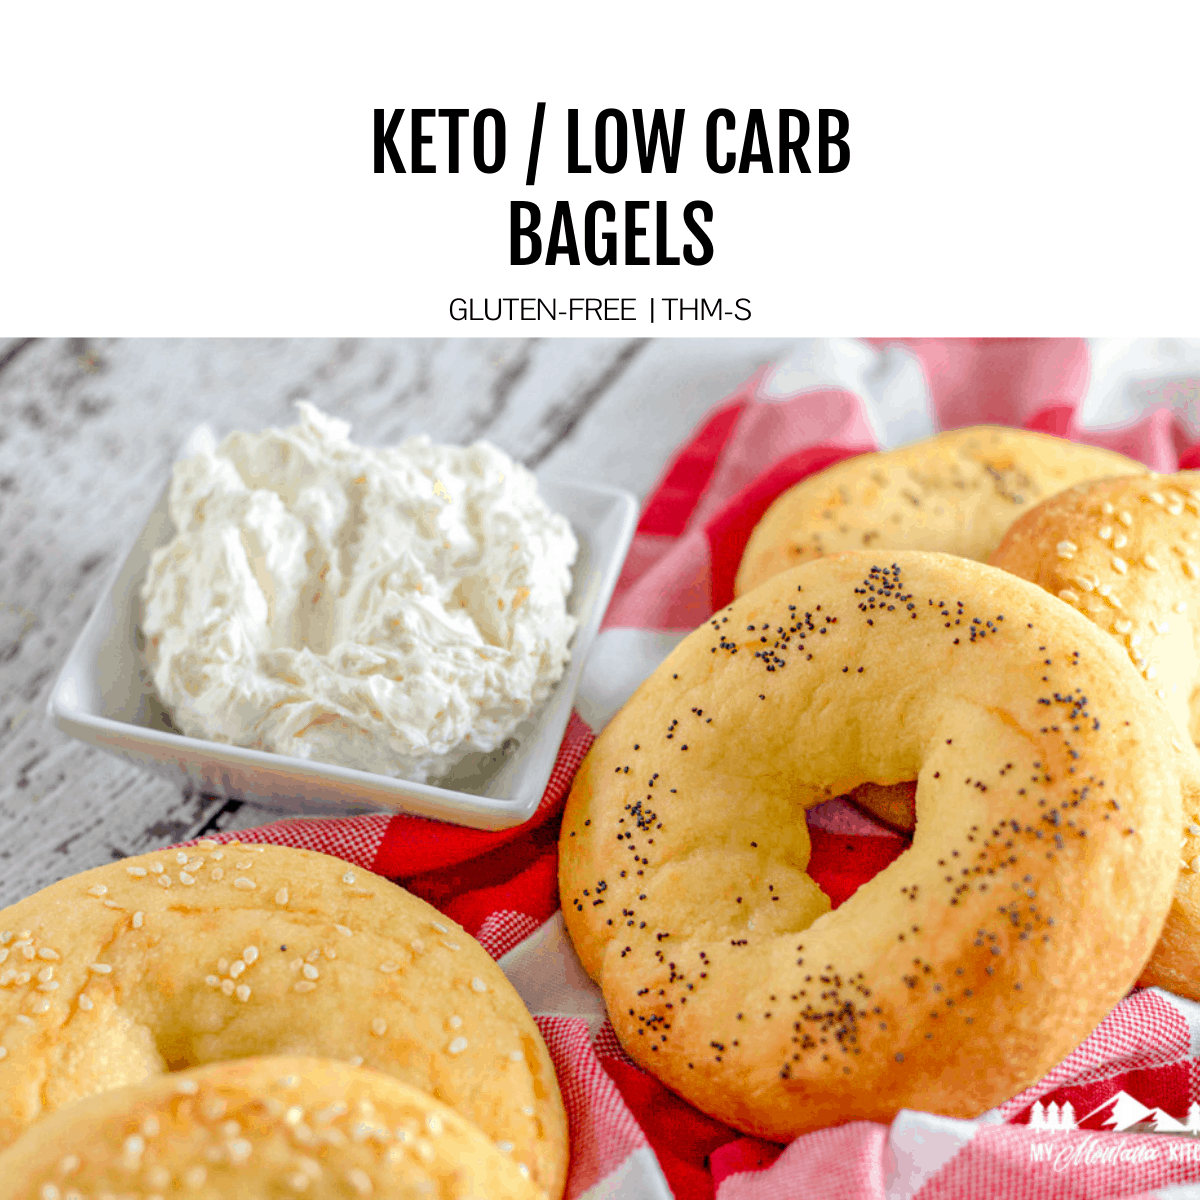 5 ingredients is all you need to make a homemade keto bagel. Top your bagels with whatever you want. A low carb bagel that is also gluten free and so simple to make.